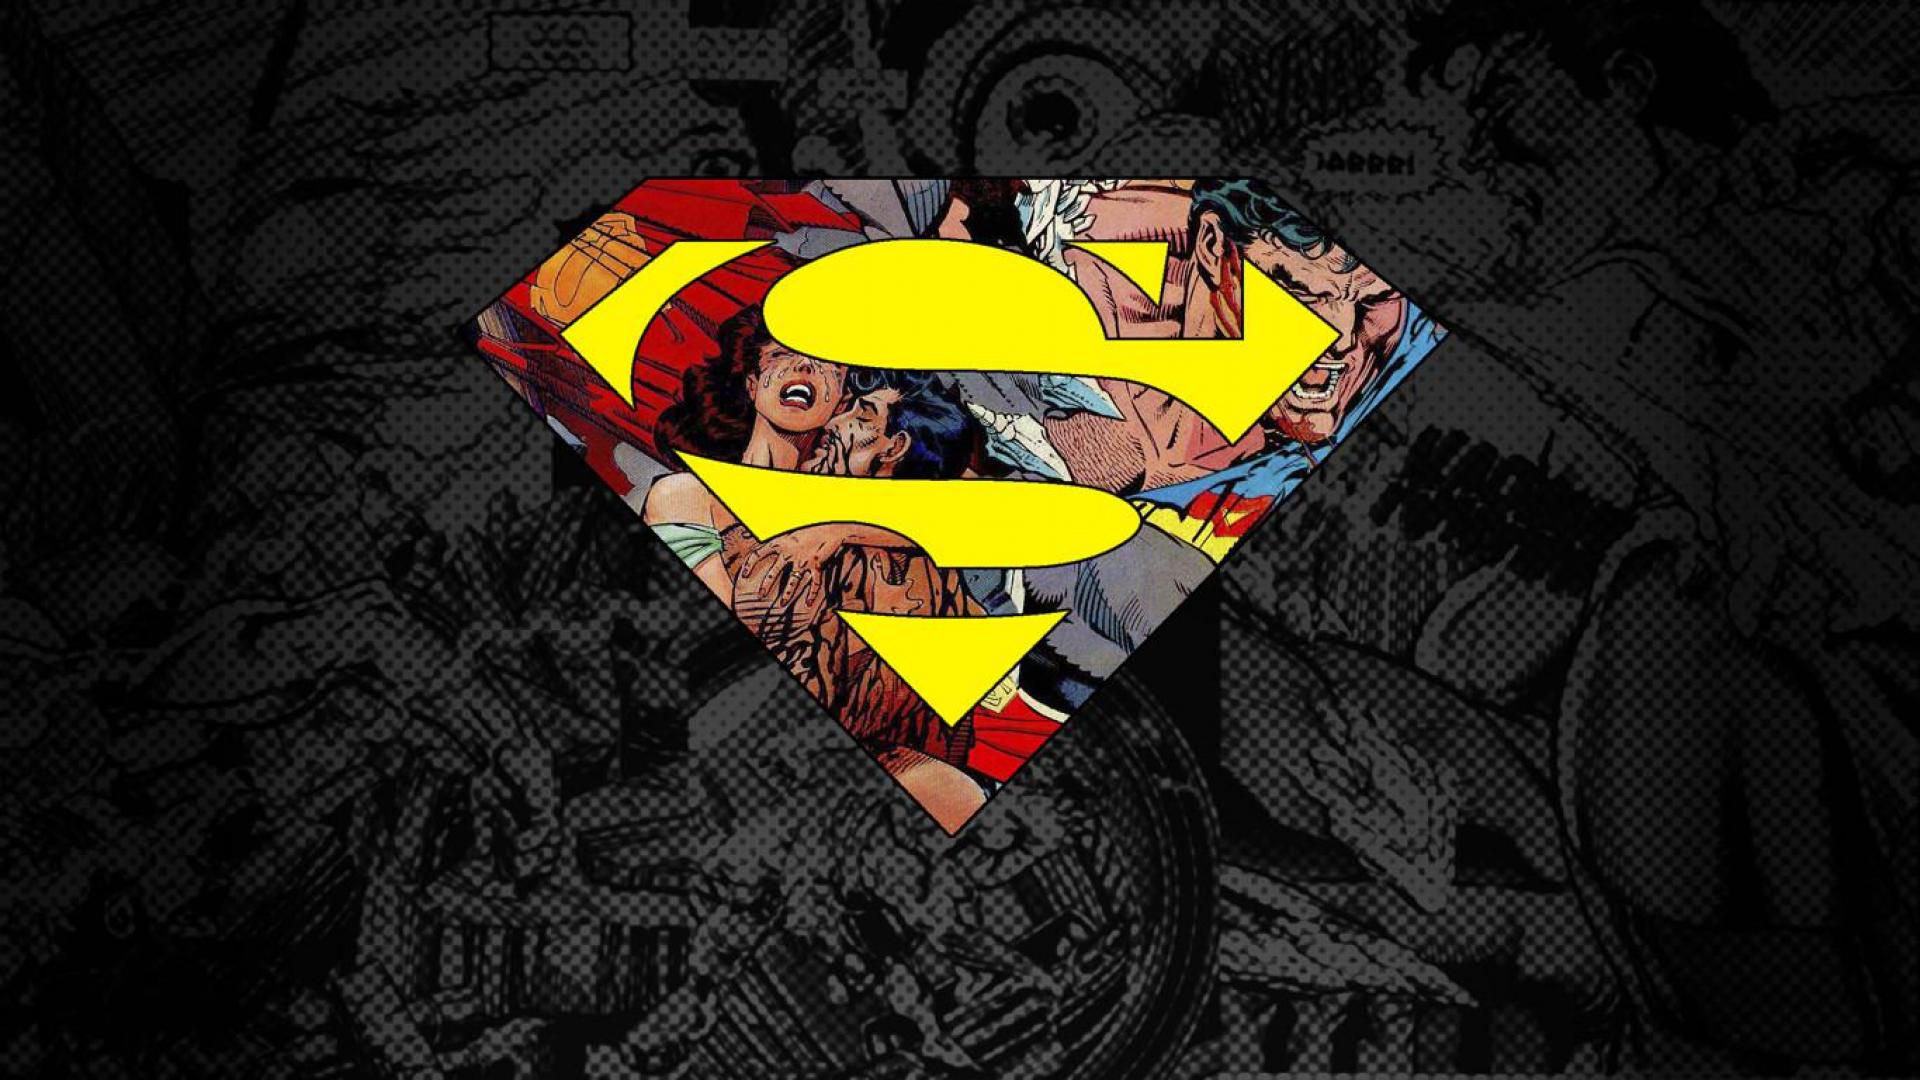 Superman - - High Quality and Resolution Wallpapers